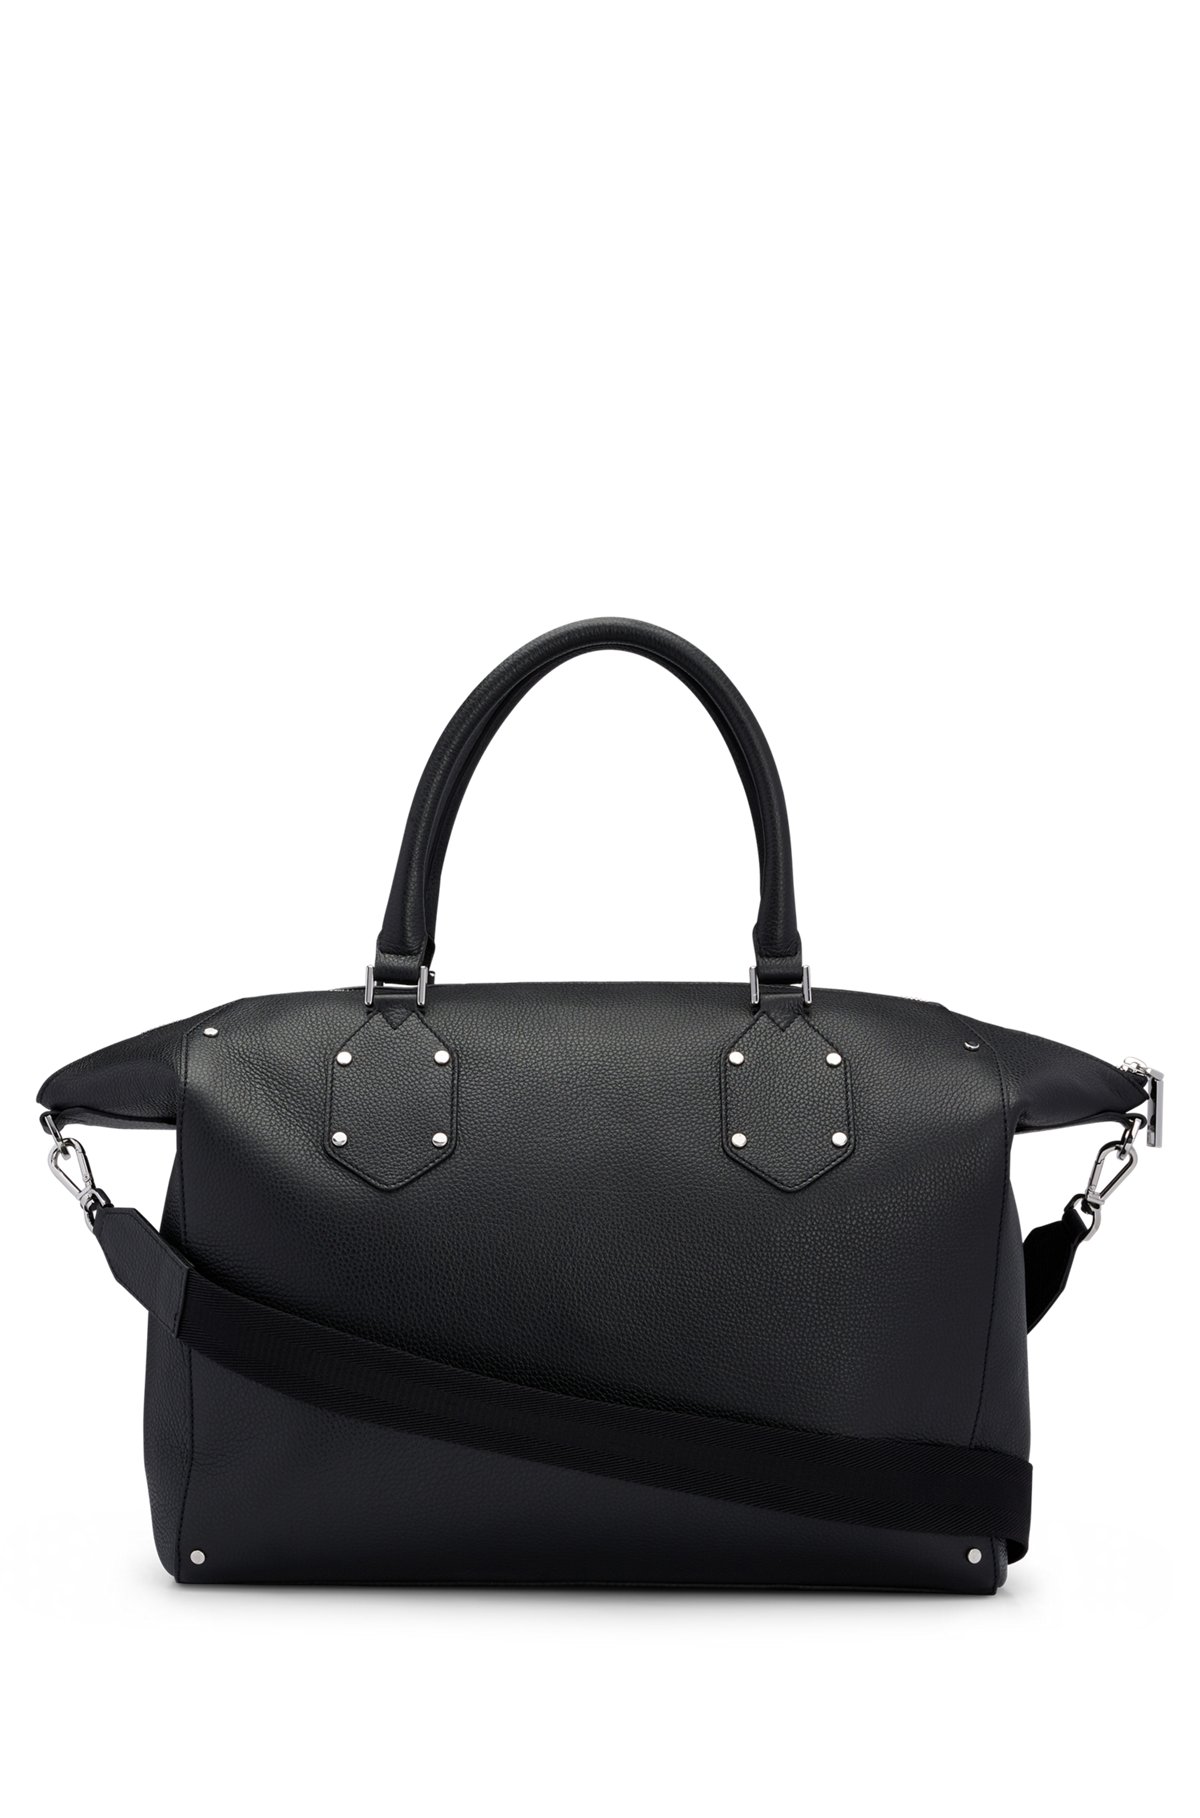 Grained-leather tote bag with logo details, Black